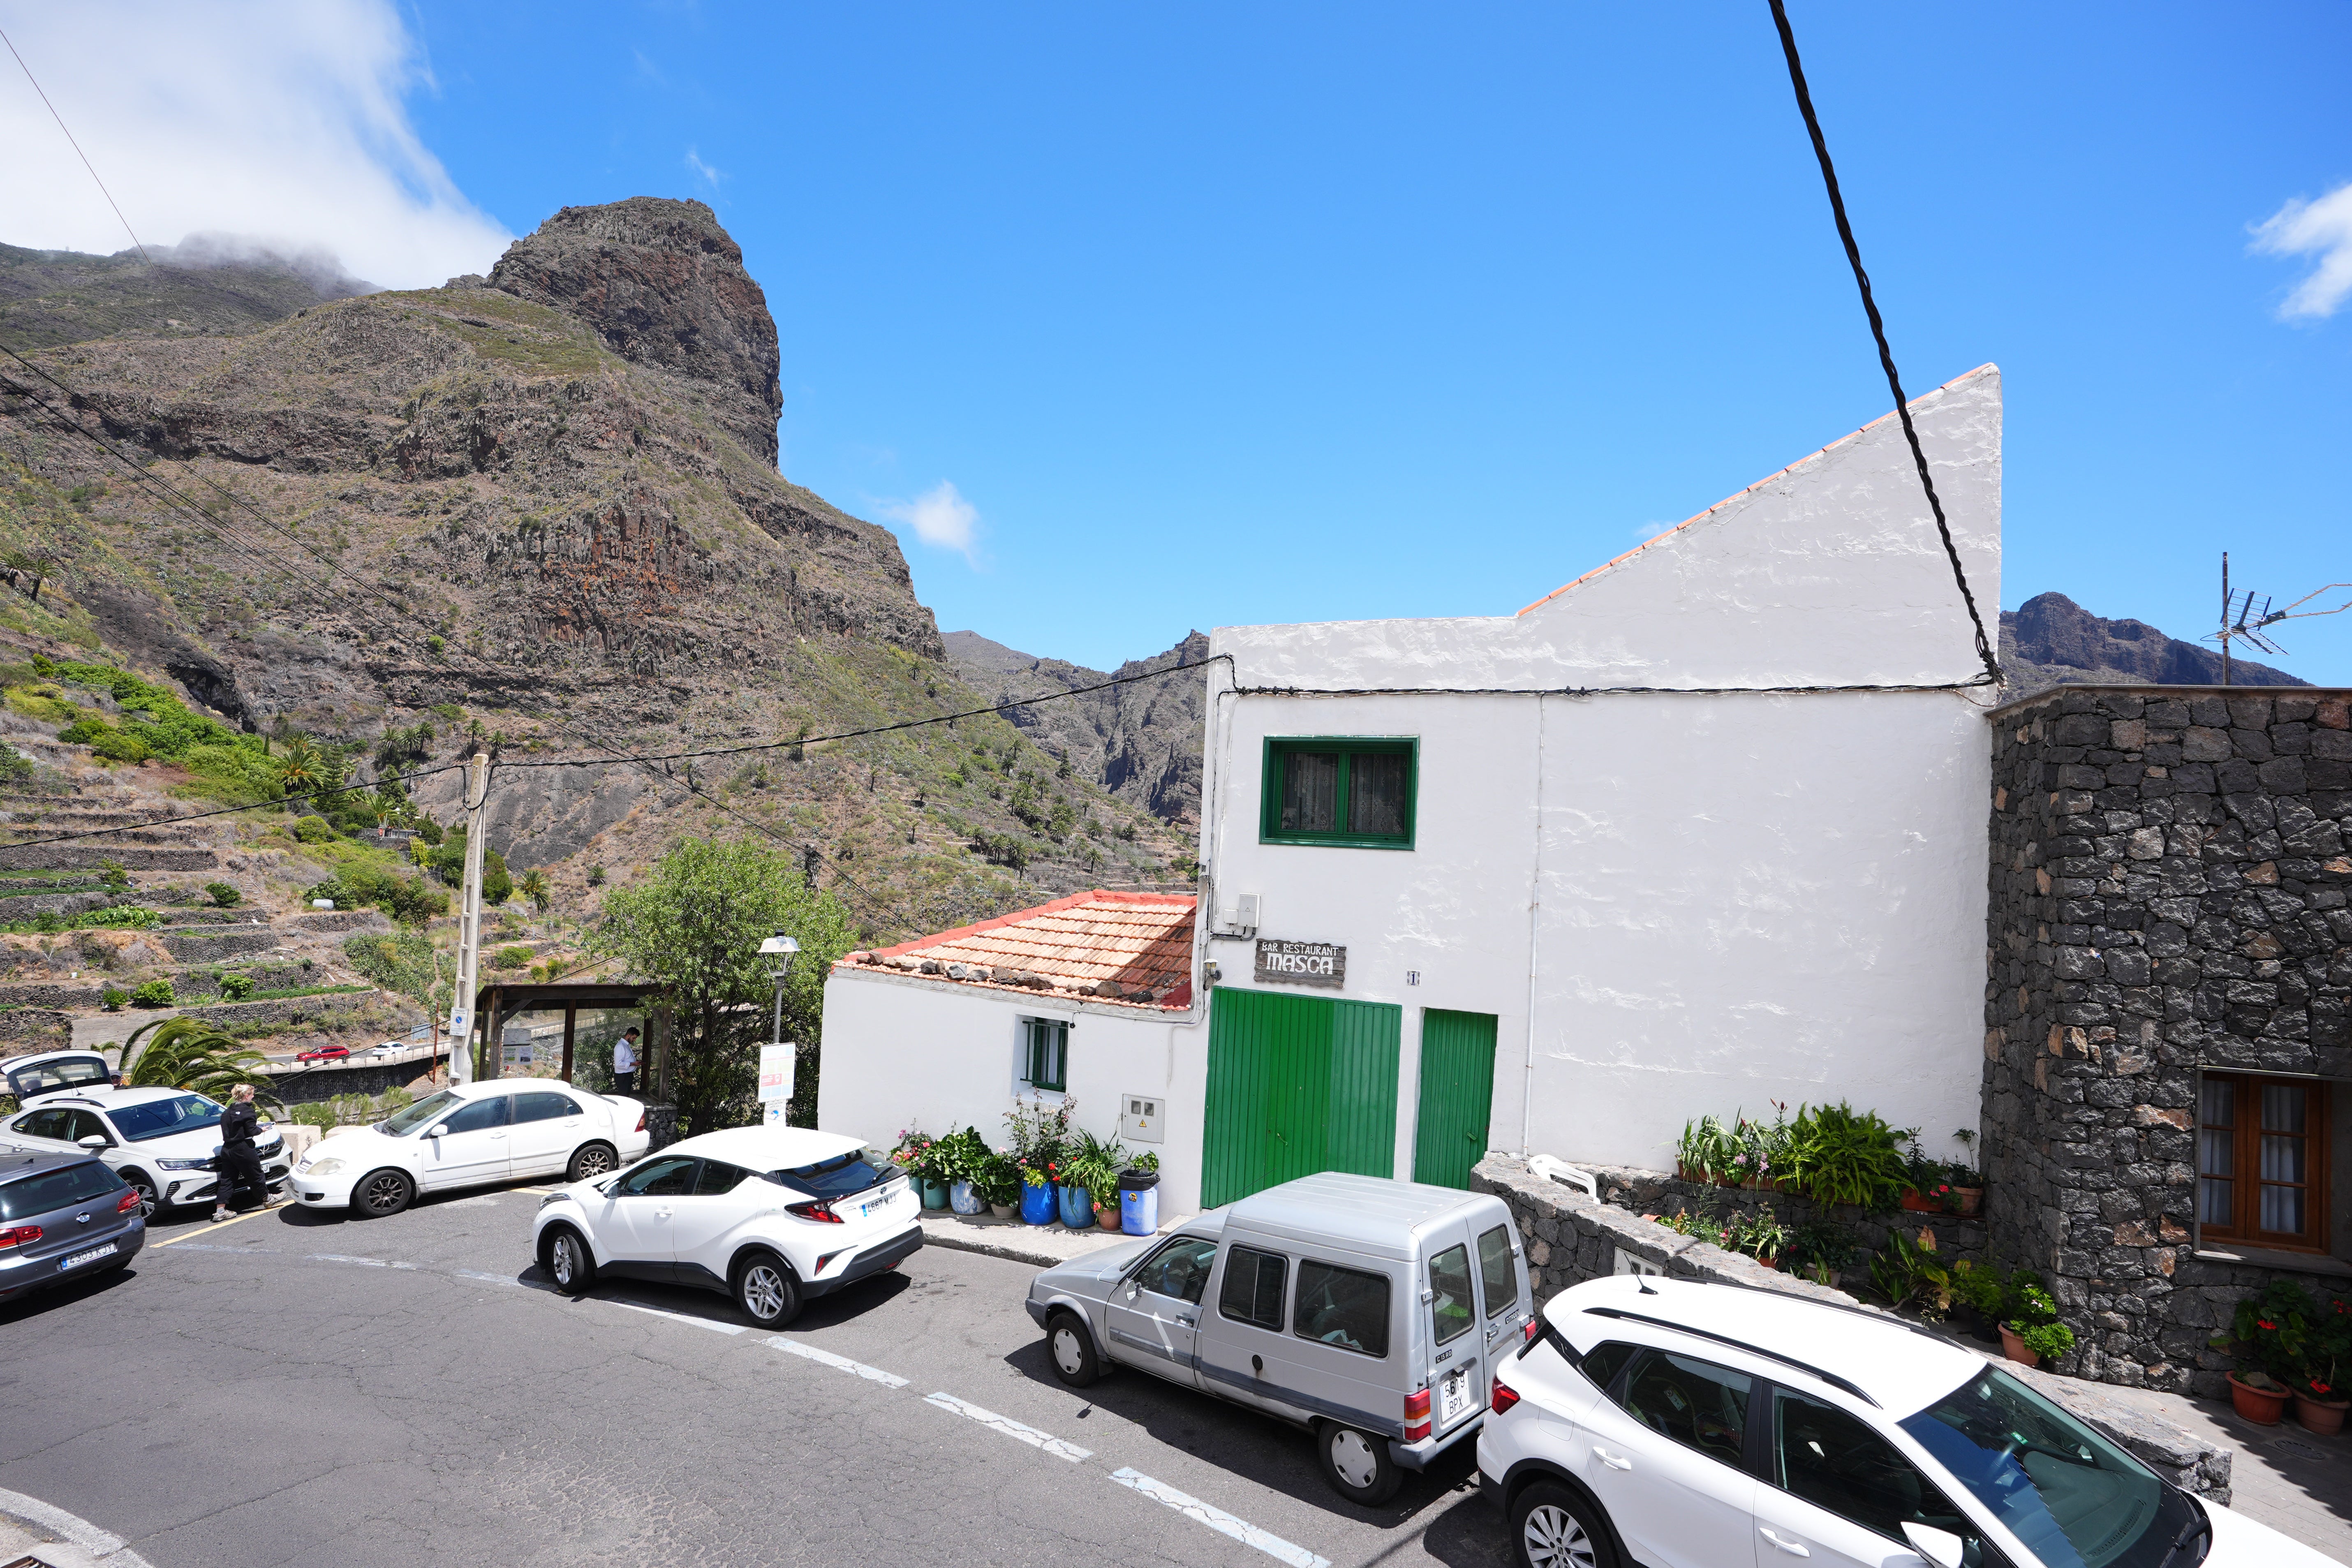 Casa Abuela Tina in Masca, Tenerife, where the missing British teenager was staying before he disappeared